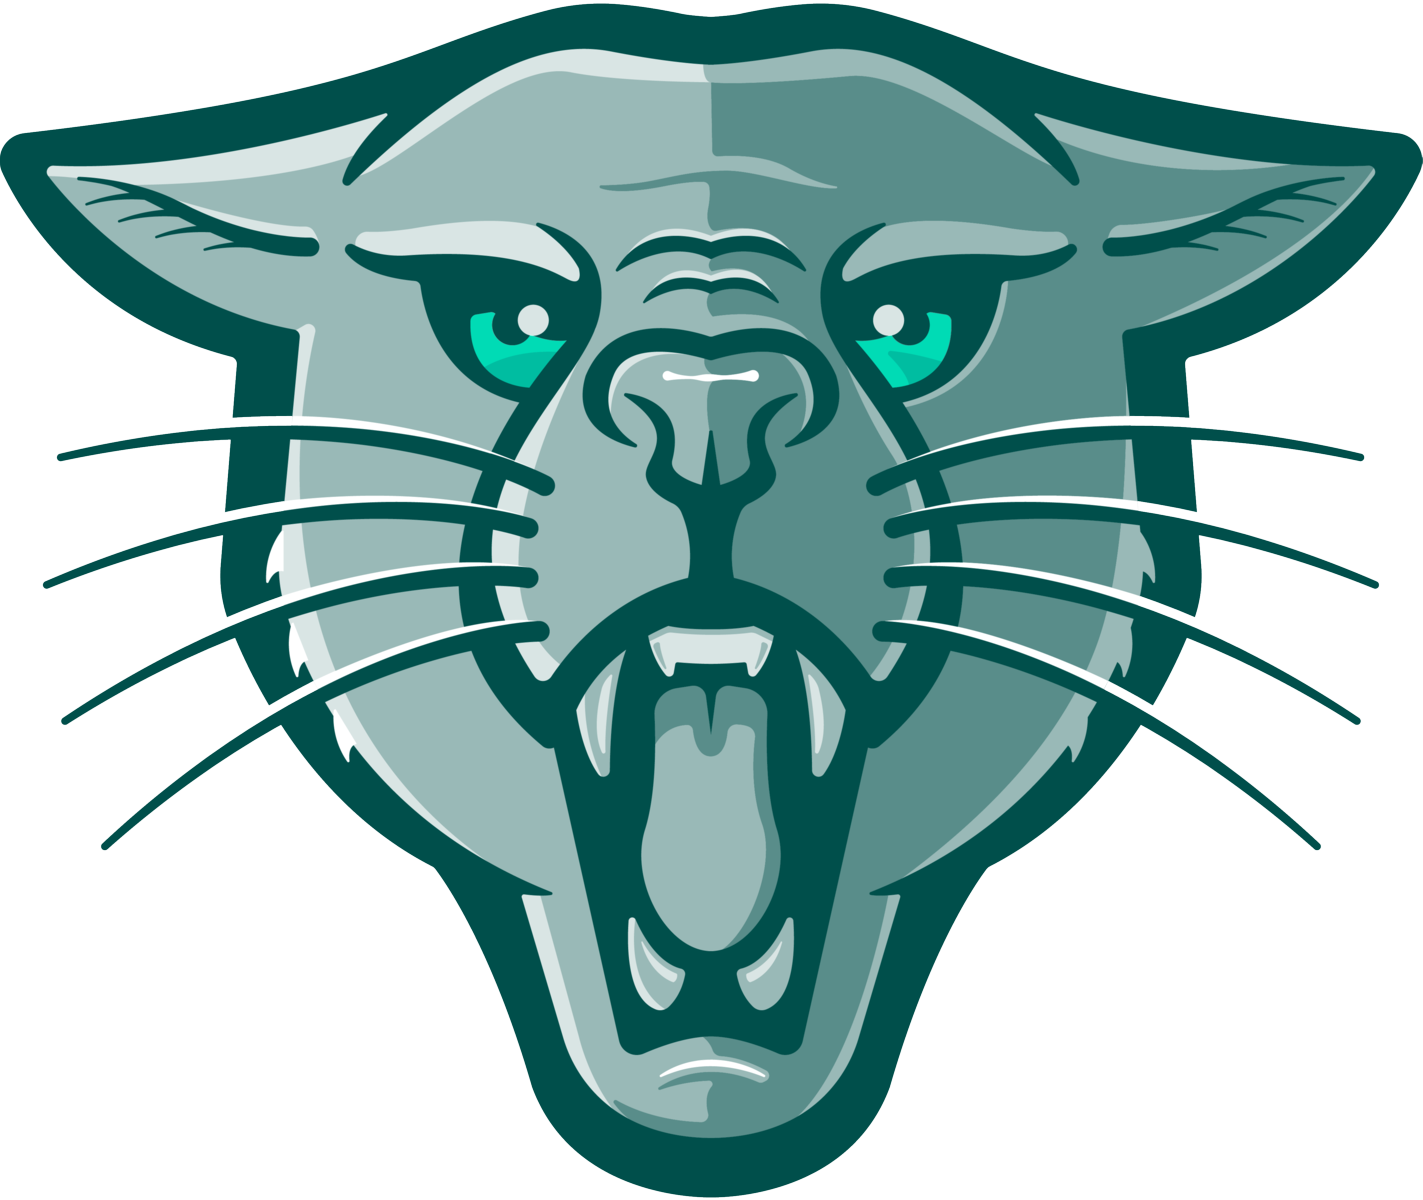 A Heritage Green outline of a roaring cougar head viewed head-on with flattened ears. The left side of the face is shaded a medium opacity Heritage Green with the right side of the face shaded a light opacity Heritage Green. The eyes are Mint Green and it is all on a white background.